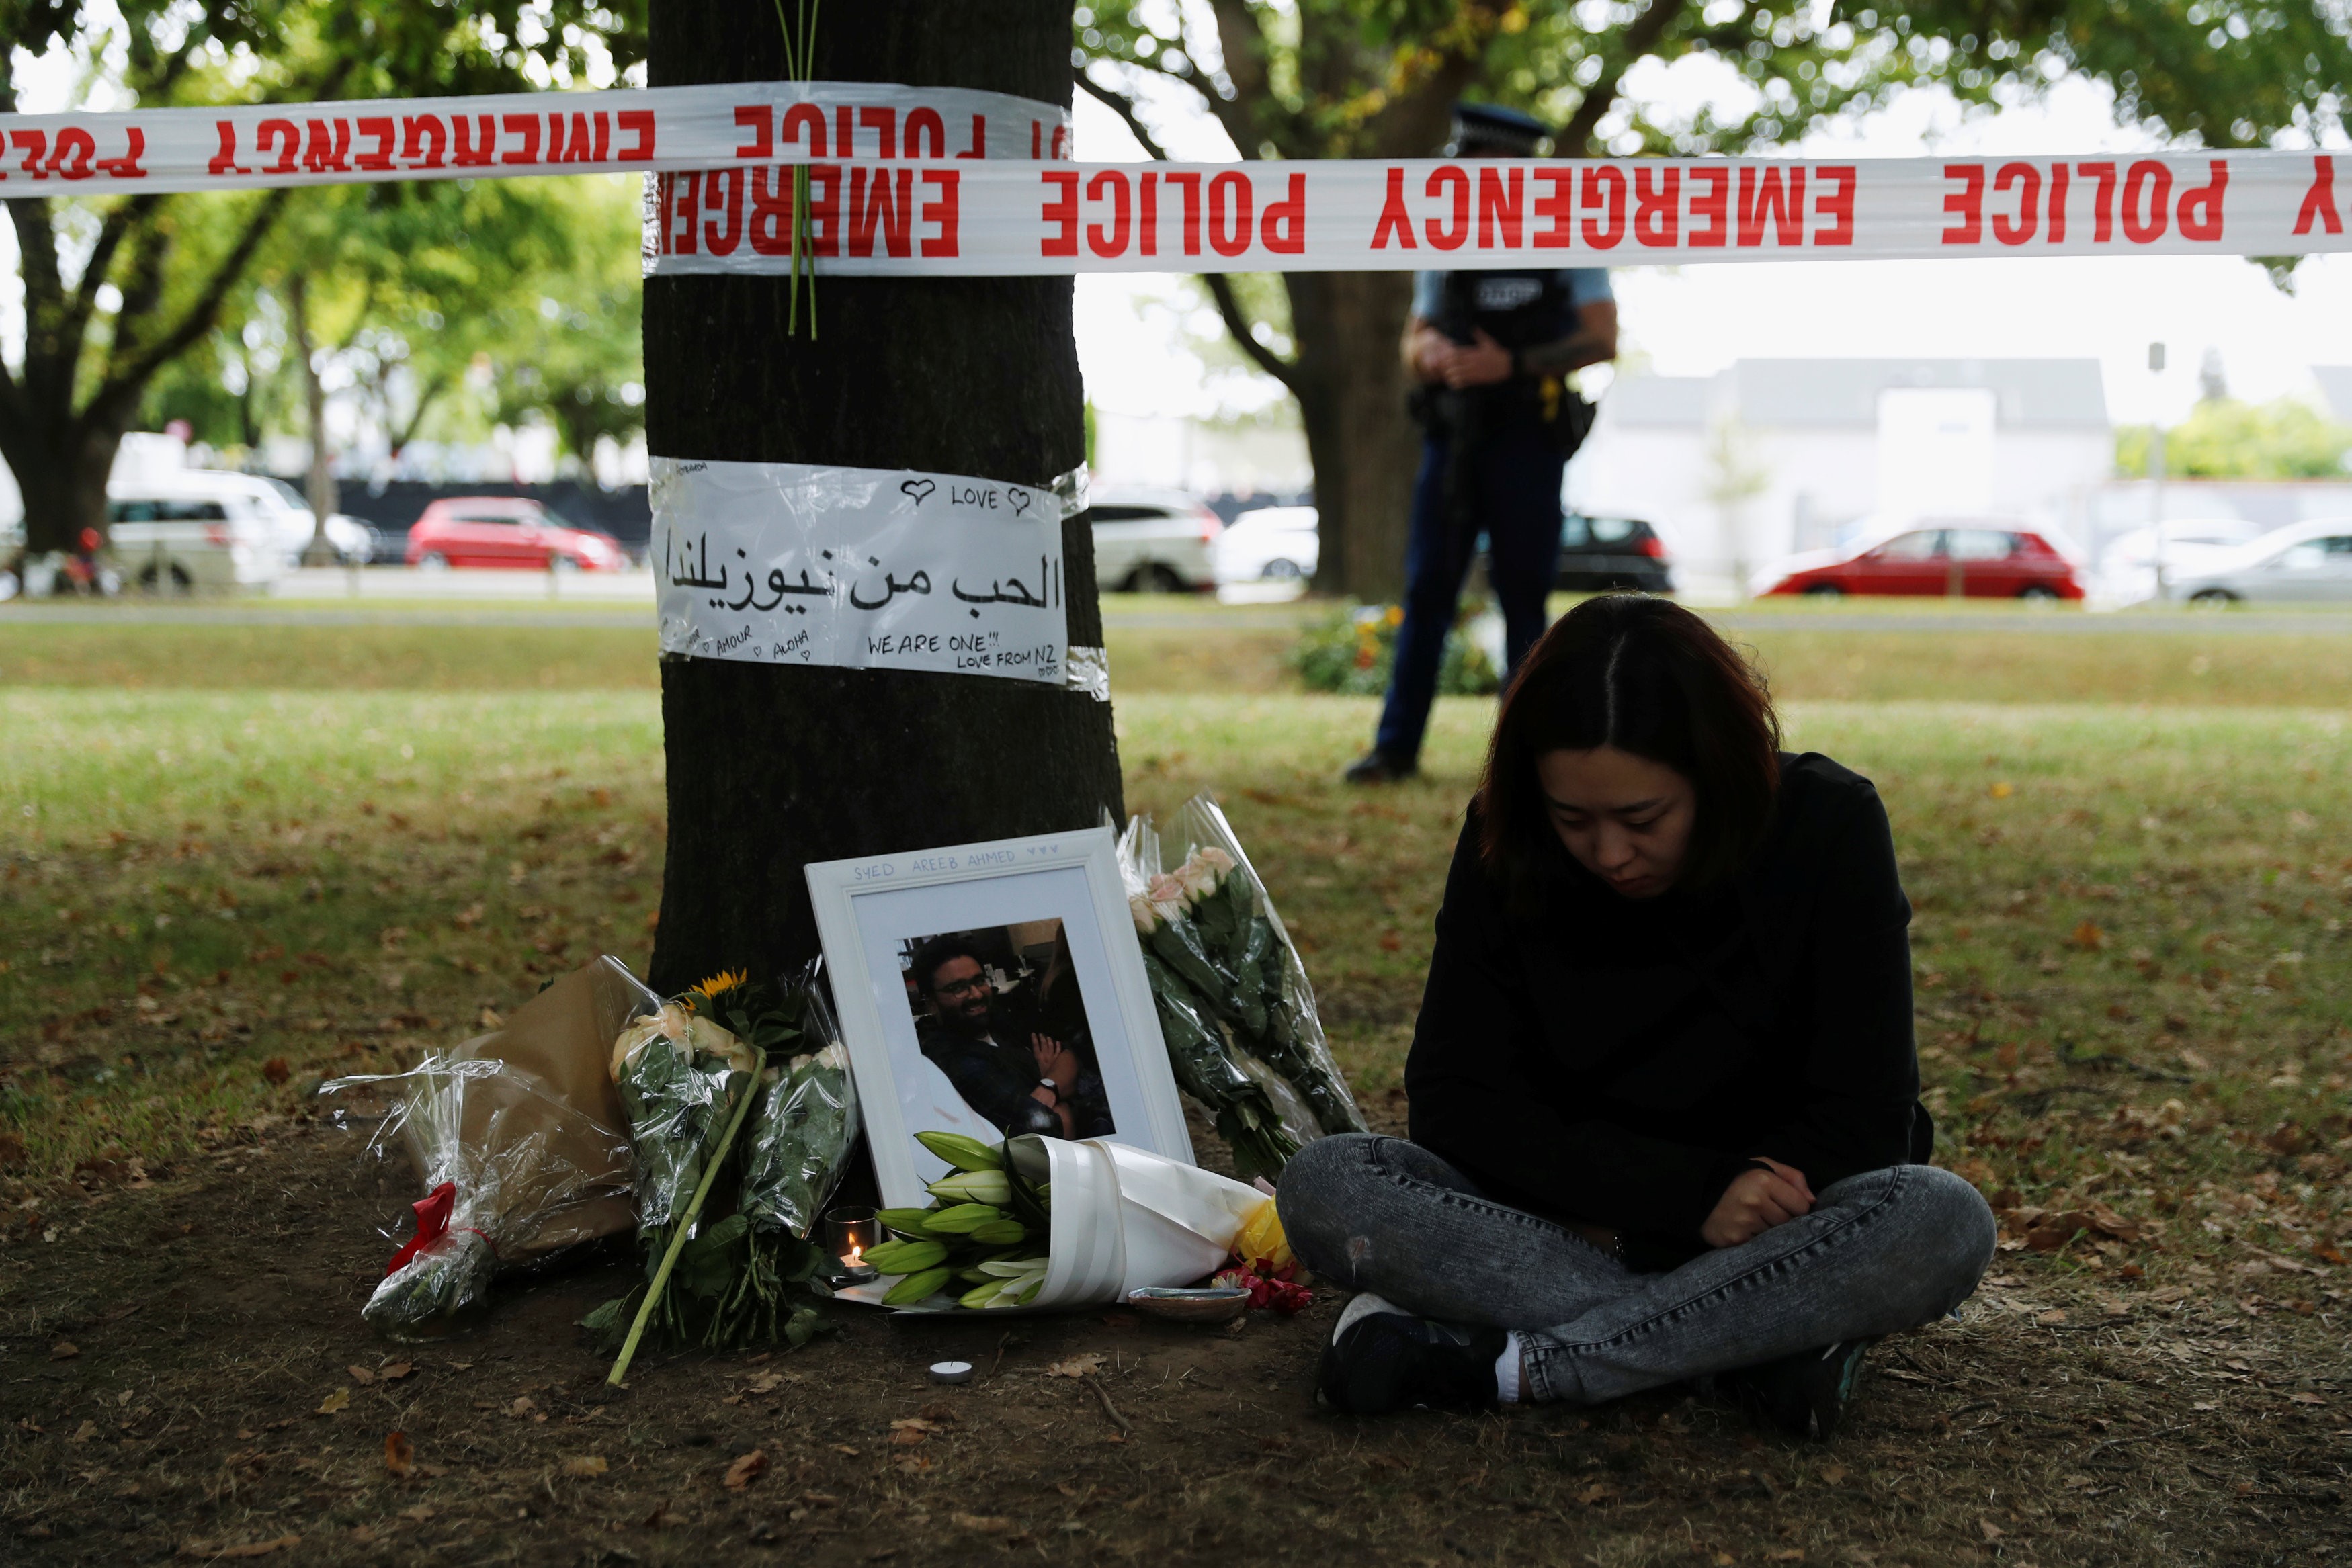    A woman sits next to flowers and messages displayed at a memorial site for victims of Friday's shooting, in front of the Masjid Al Noor mosque in Christchurch, New Zealand 18 March, 2019 (REUTERS)